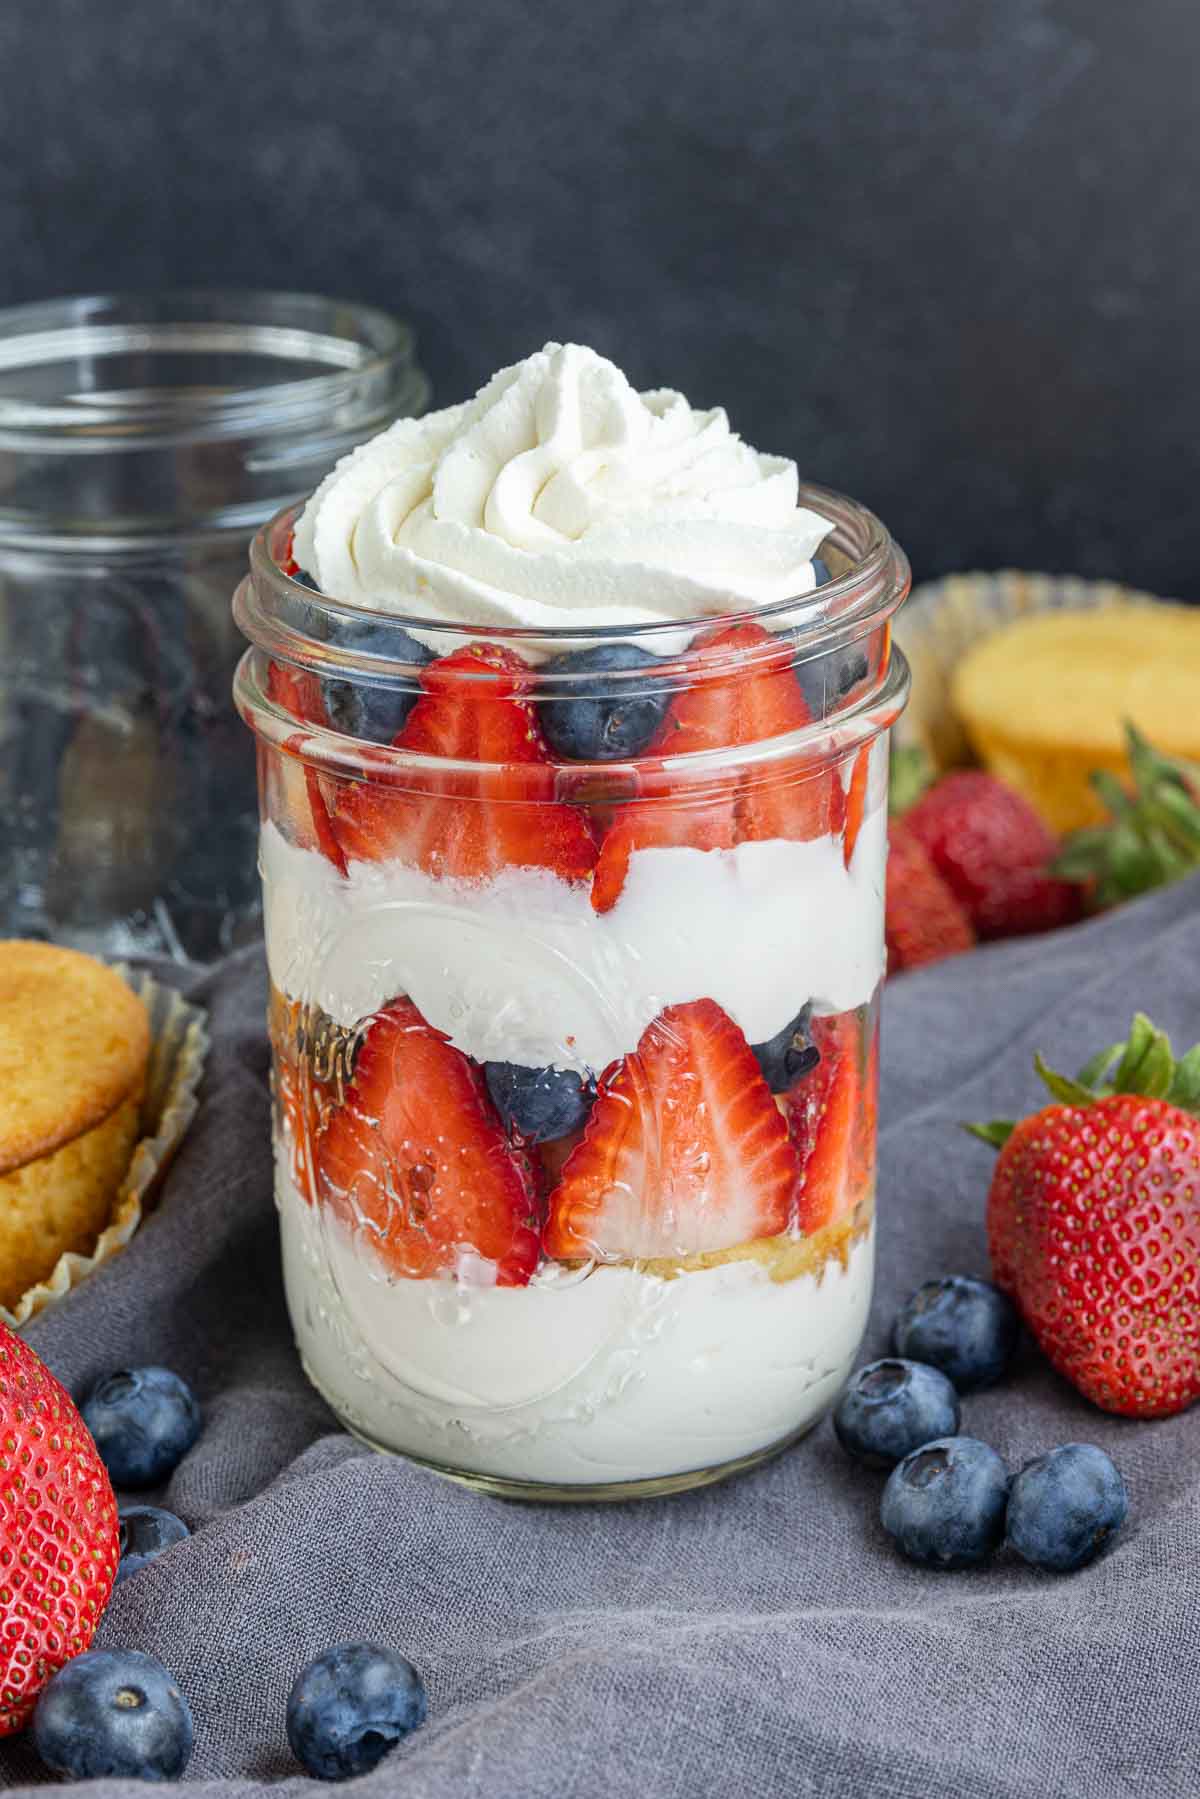 cupcakes in a jar with fresh fruit and whipped cream. Topped with 4th of July stars